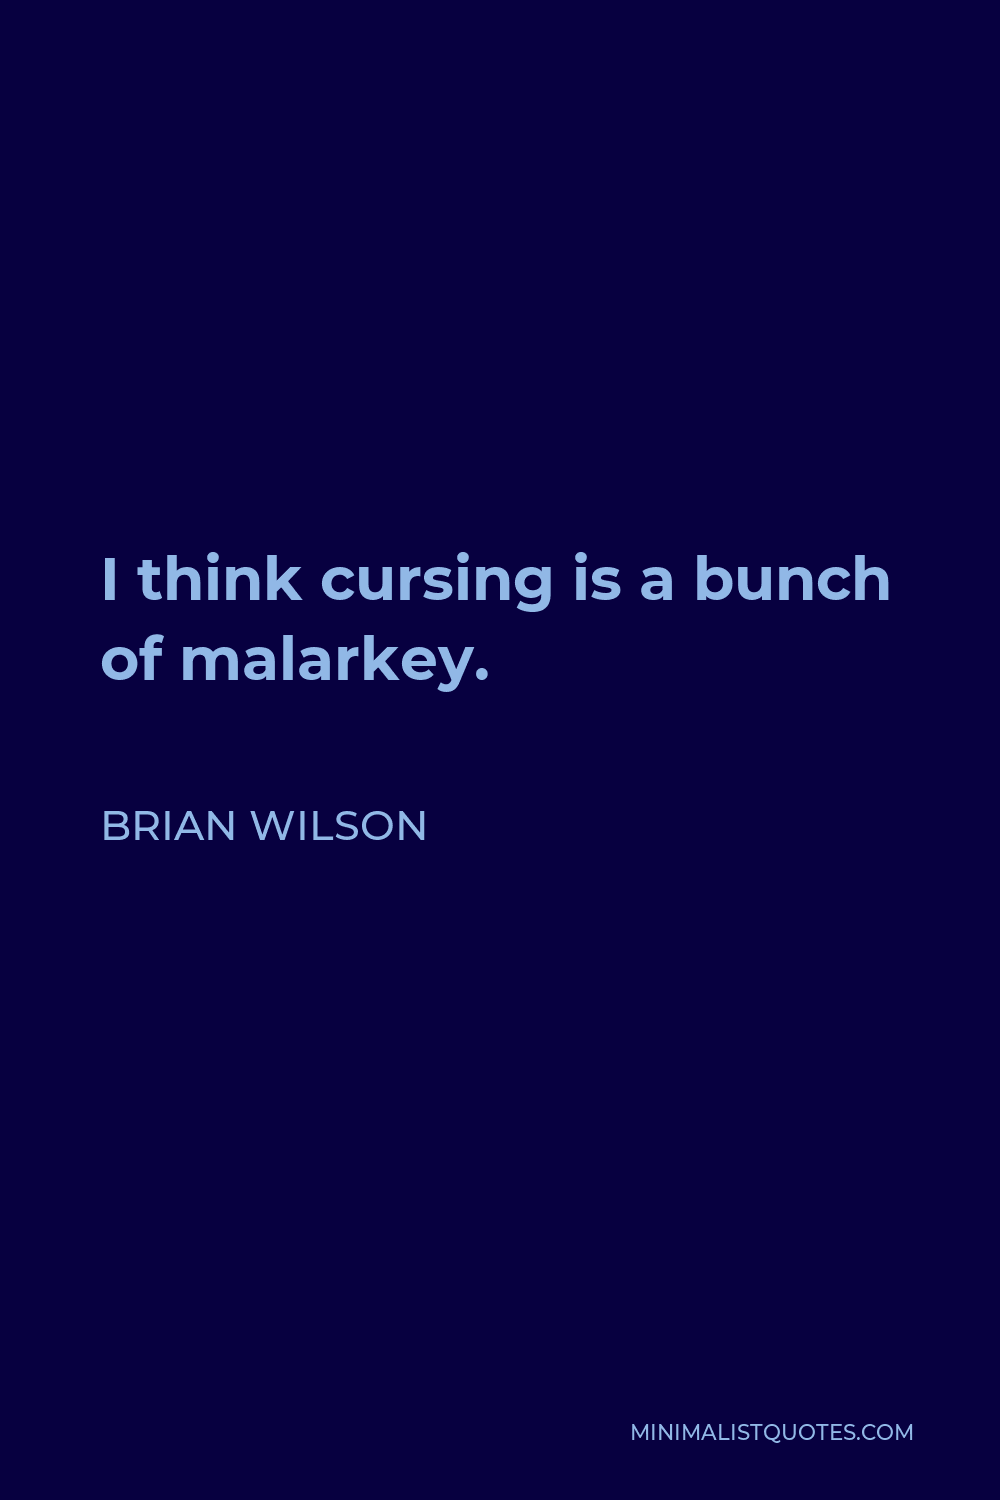 Brian Wilson Quote - I think cursing is a bunch of malarkey.